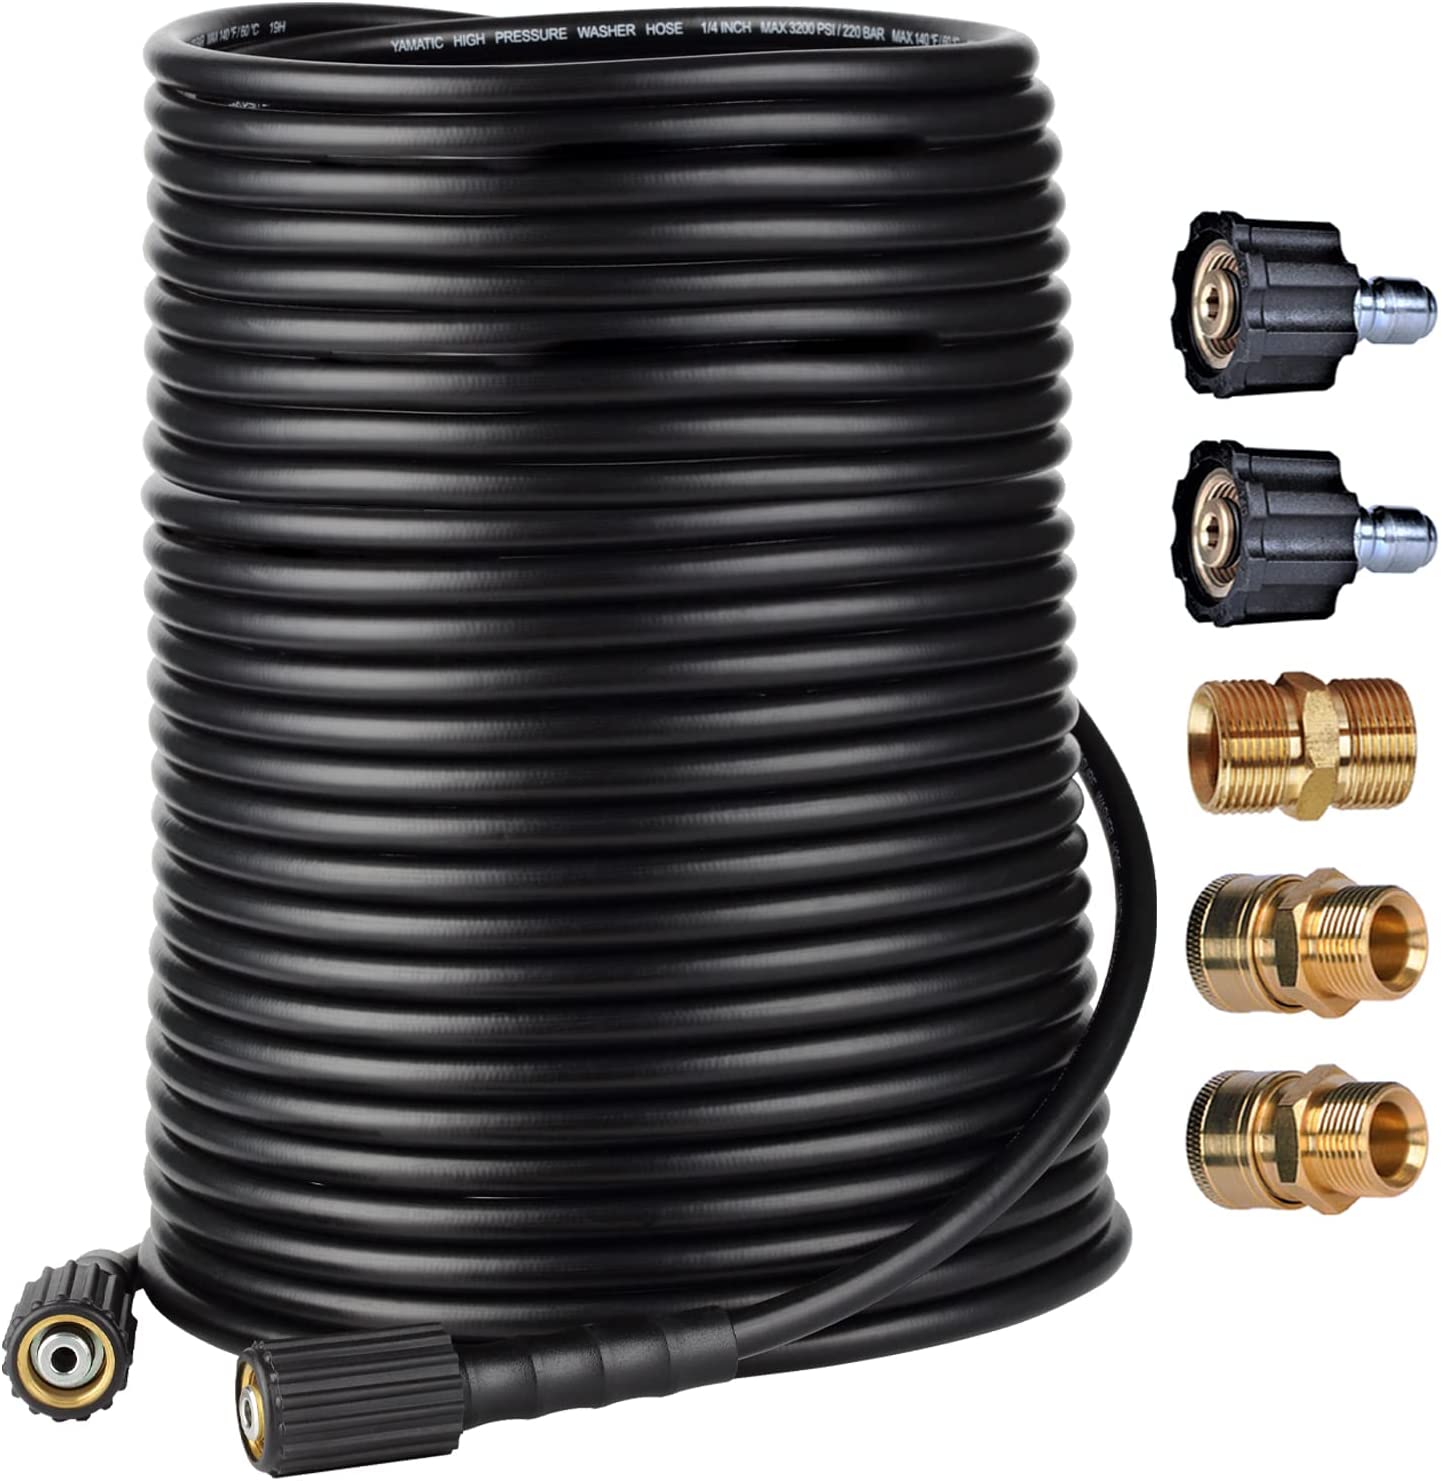 YAMATIC W Pressure Washer Hose 100ft Kink Resistant, Extension Power Washer Hose 3200 PSI X 1/4", M22 to 3/8" Quick Connect Couplers for Replacement (Pr